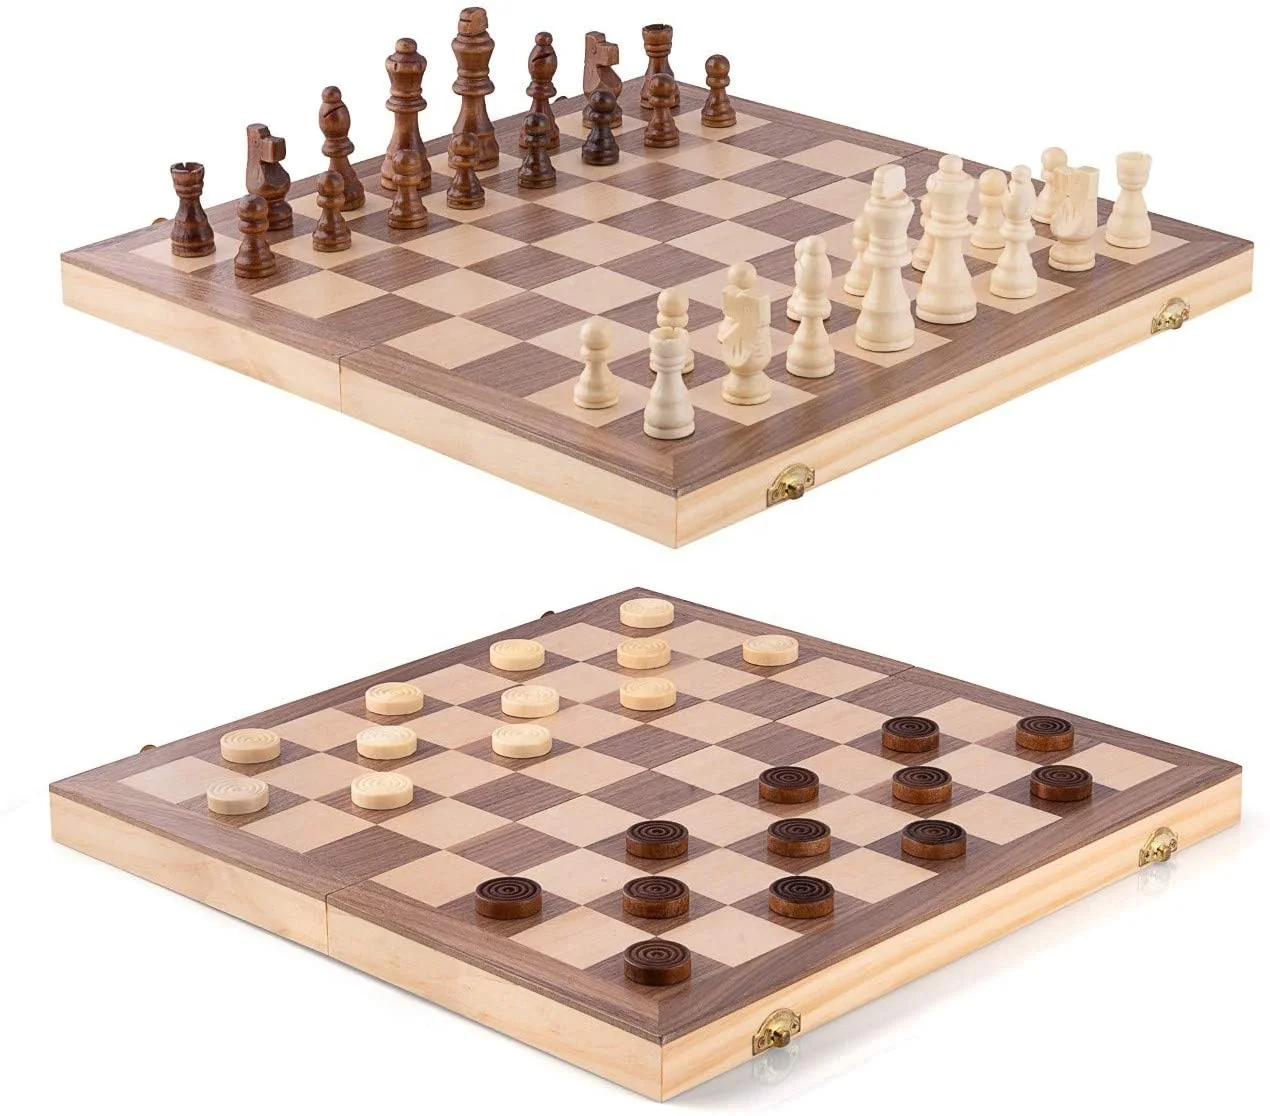 

Wooden Chess Set Handcrafted Chess Pieces 15 Inch Chess Board Foldable Interior Storage Space Travel Friendly Felt B